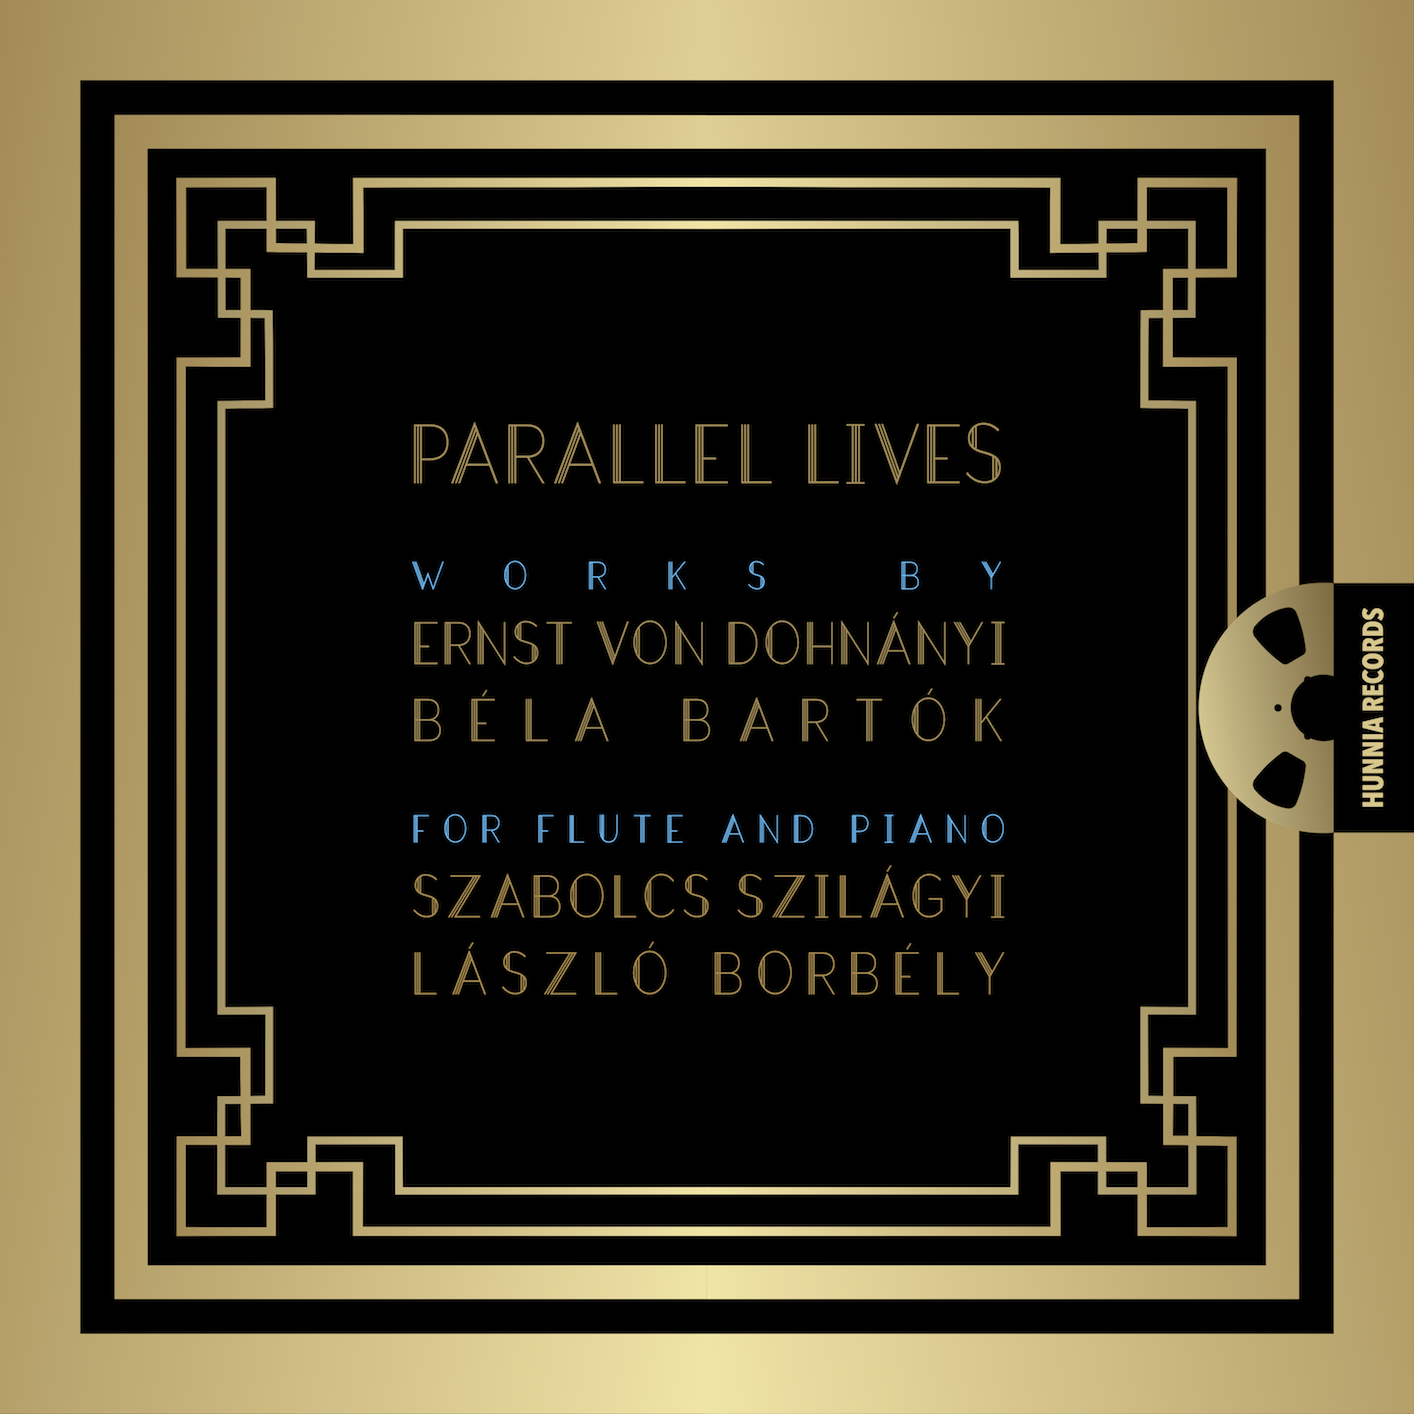 Szabolcs Szilaagyi & Laszlo Borbely - Parallel Lives - Works by Ernst von Dohnanyi and Béla Bartok for flute and piano (2020/2021) [FLAC 24bit/192kHz]